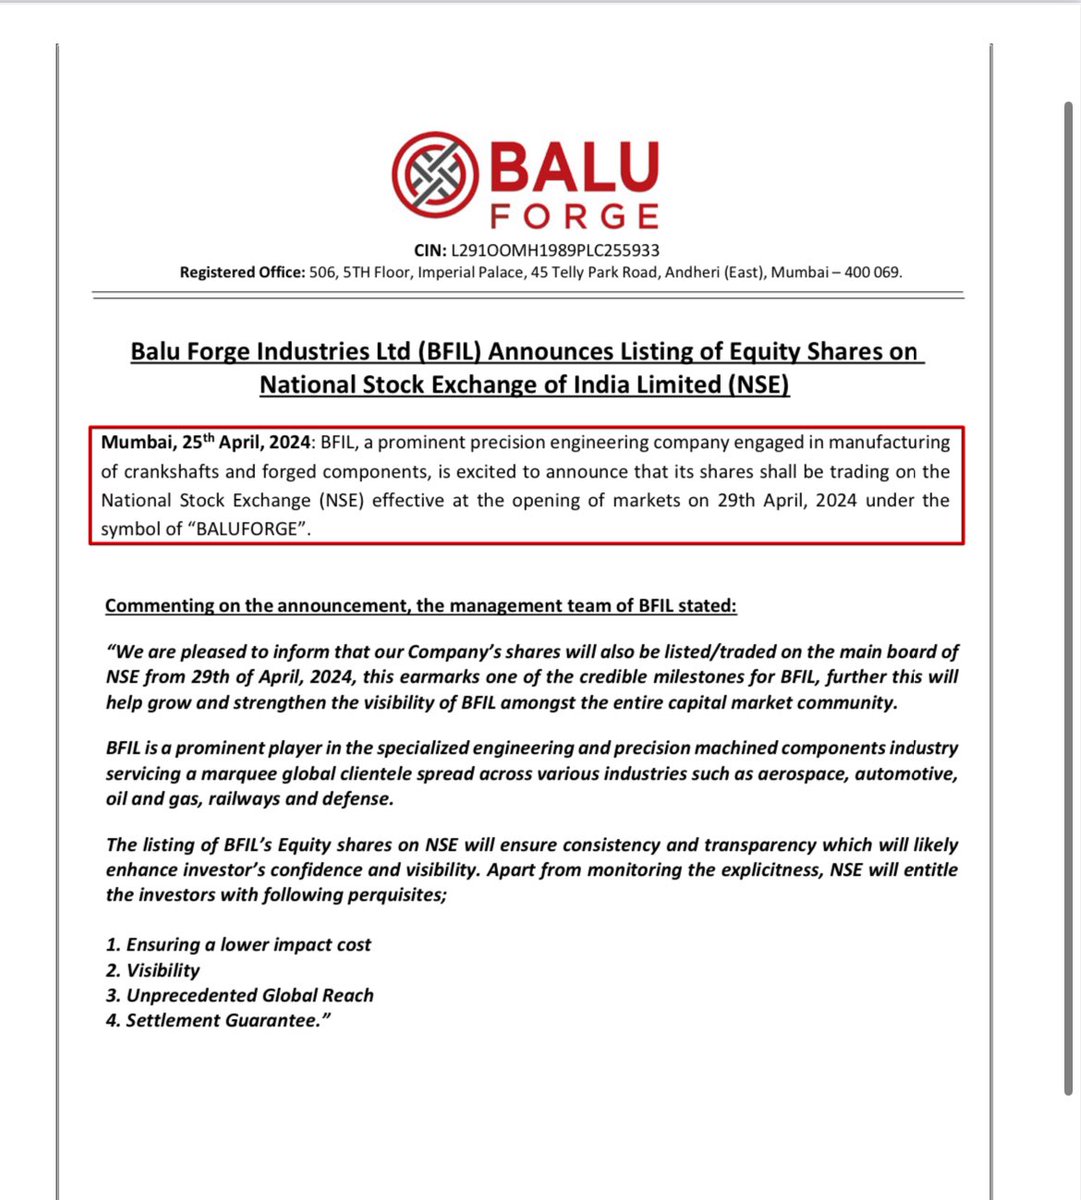 Balu forge on NSE 29th April 2024